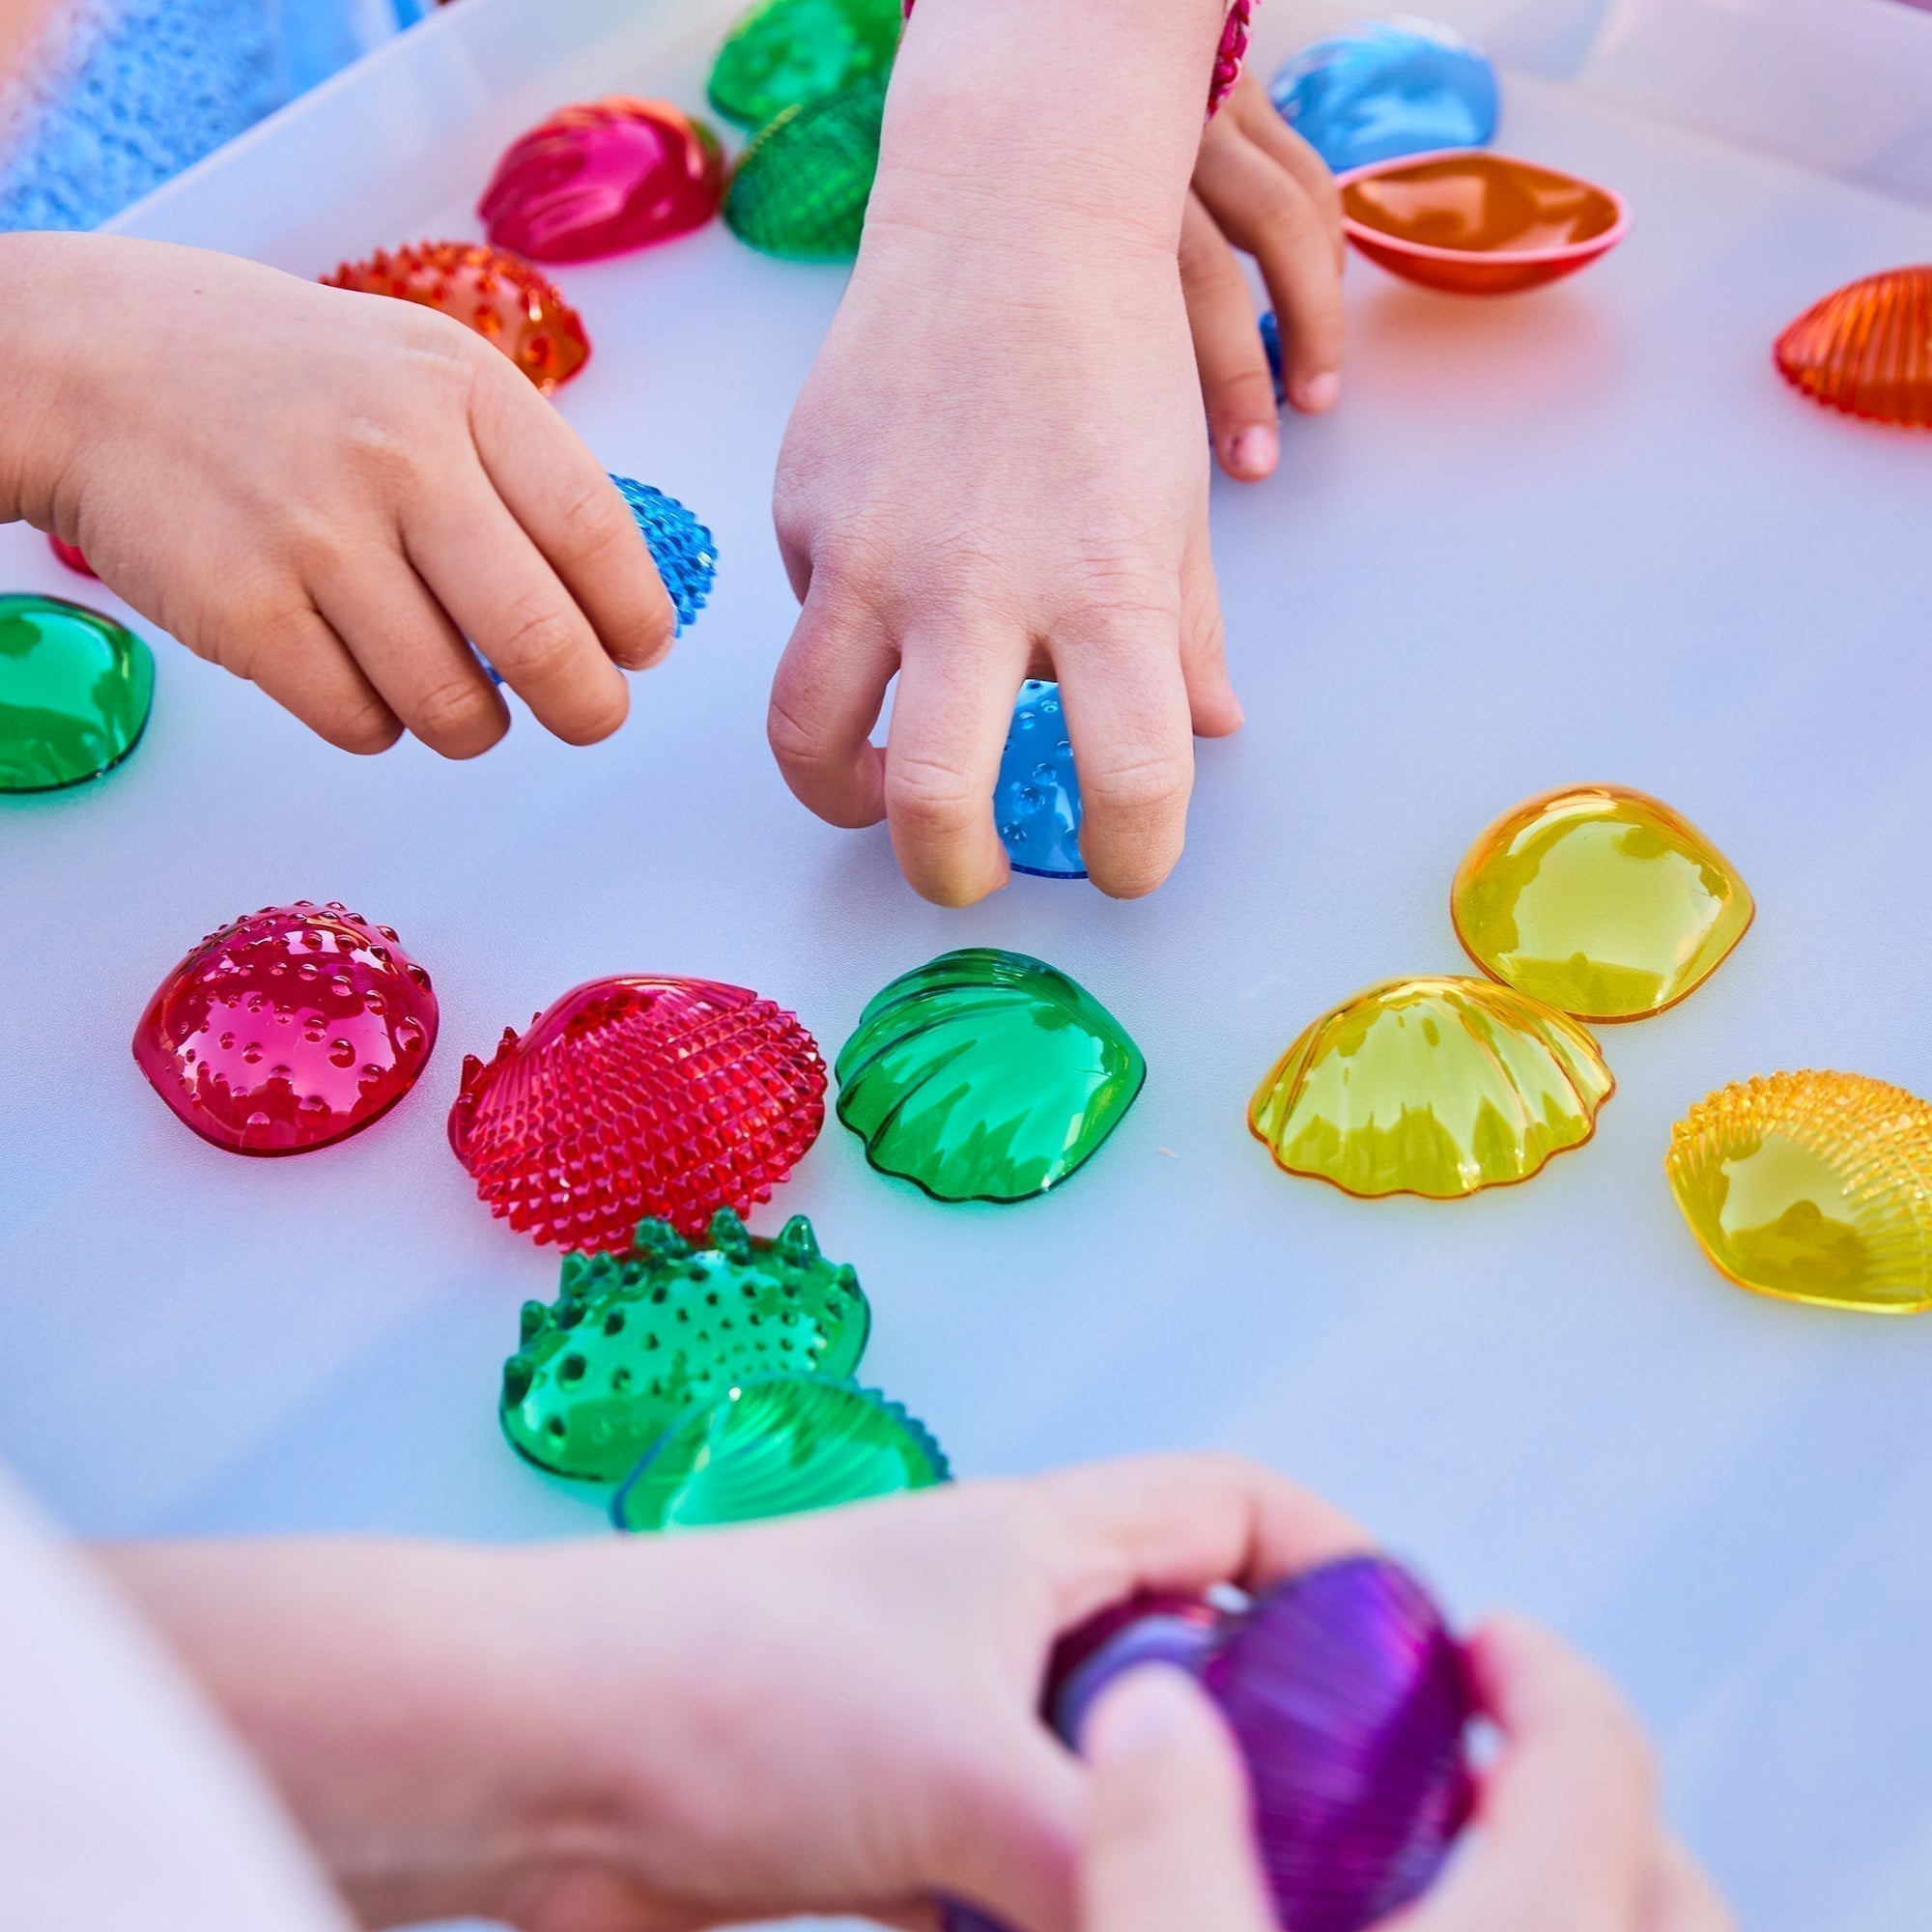 Transparent Tactile Shells - Pk108, The Transparent Tactile Shell's are beautiful translucent colour seashells in 2 sizes and 6 colours with 6 different tactile surfaces. Children will love to touch and feel these Transparent Tactile Shells, describing the differences and similarities as well as discovering the colours and colour-mixing opportunities they provide. The Transparent Tactile Shells - Pk108 are ideal to teach early number concepts such as sorting, matching, comparing, sequencing, patterning and 